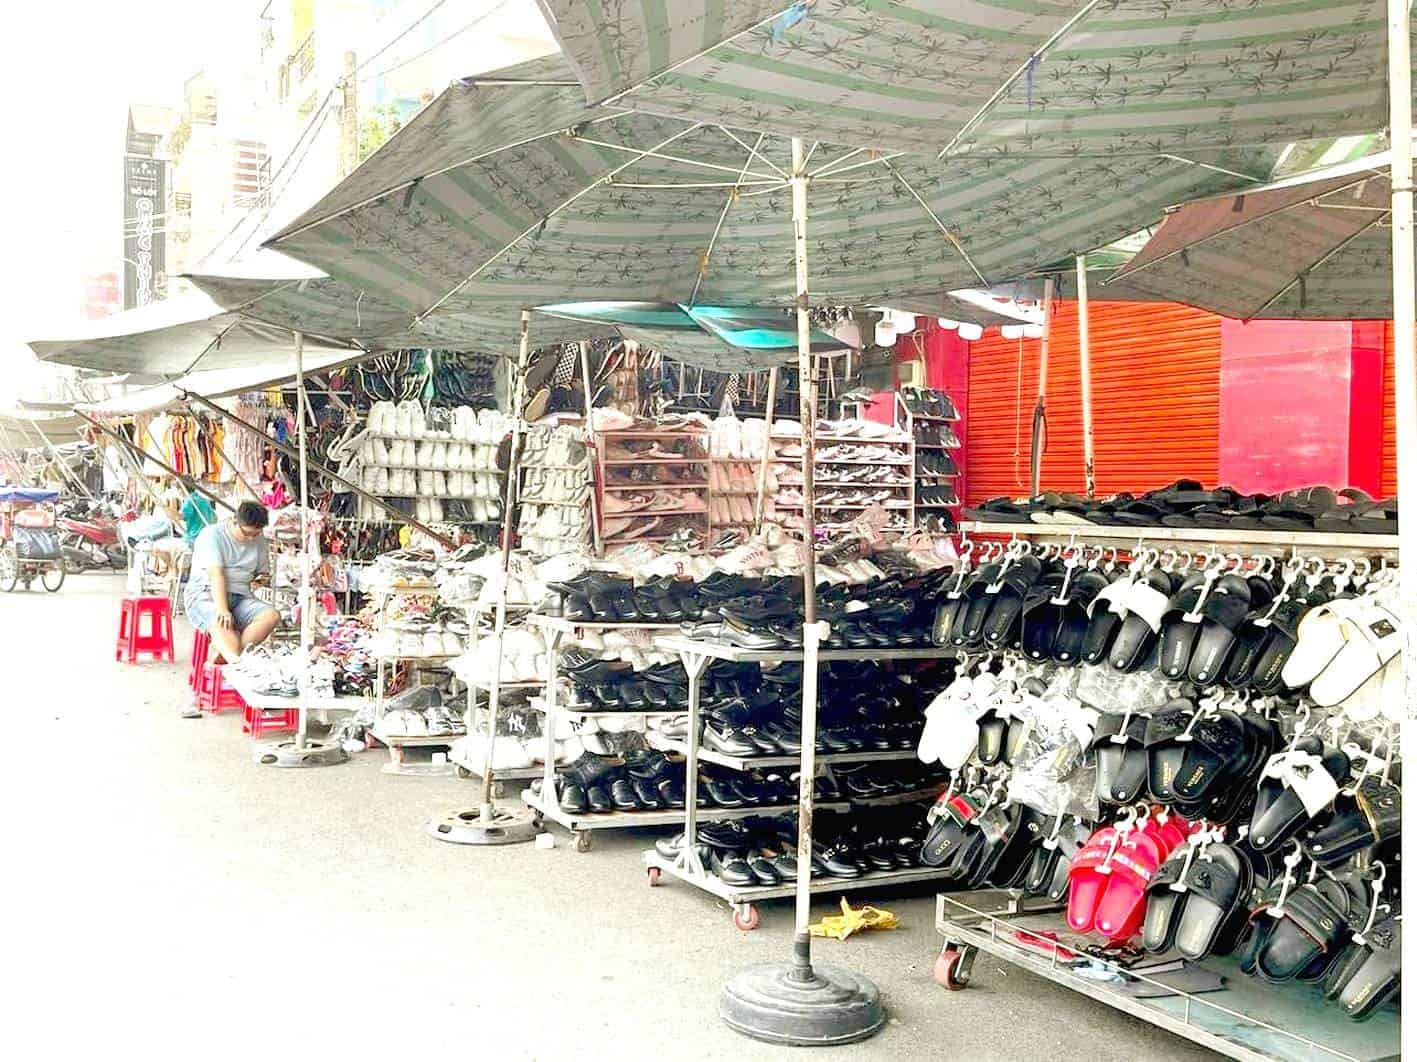 Shoes and footwear are the main products at Hanh Thong Tay Market.